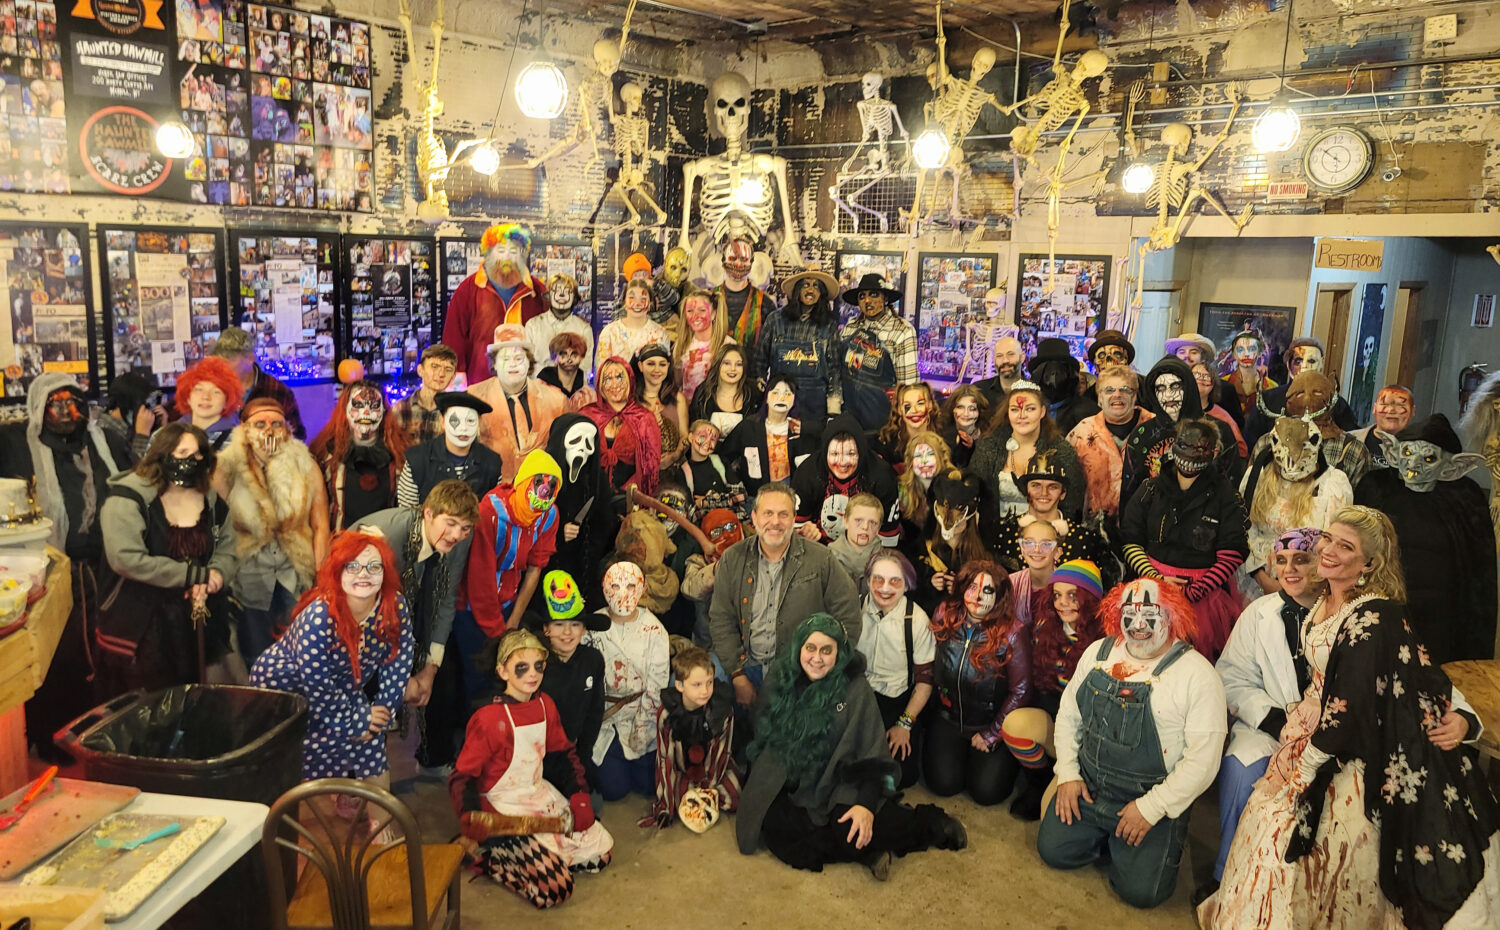 Haunted Sawmill draws thrill seekers, supports kids and community